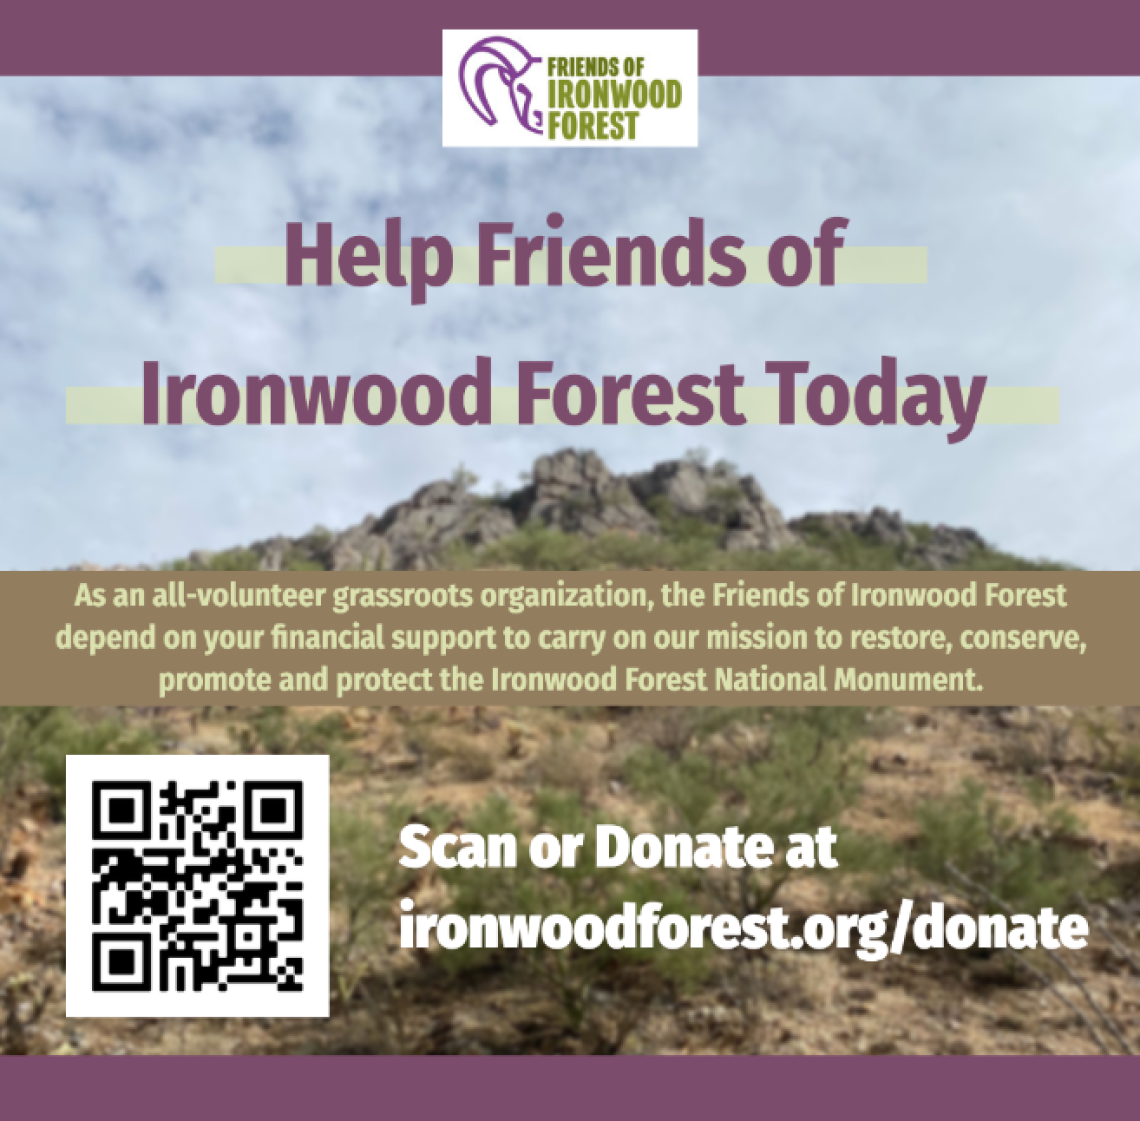 Social media post for Friends of Ironwood Forest National Monument